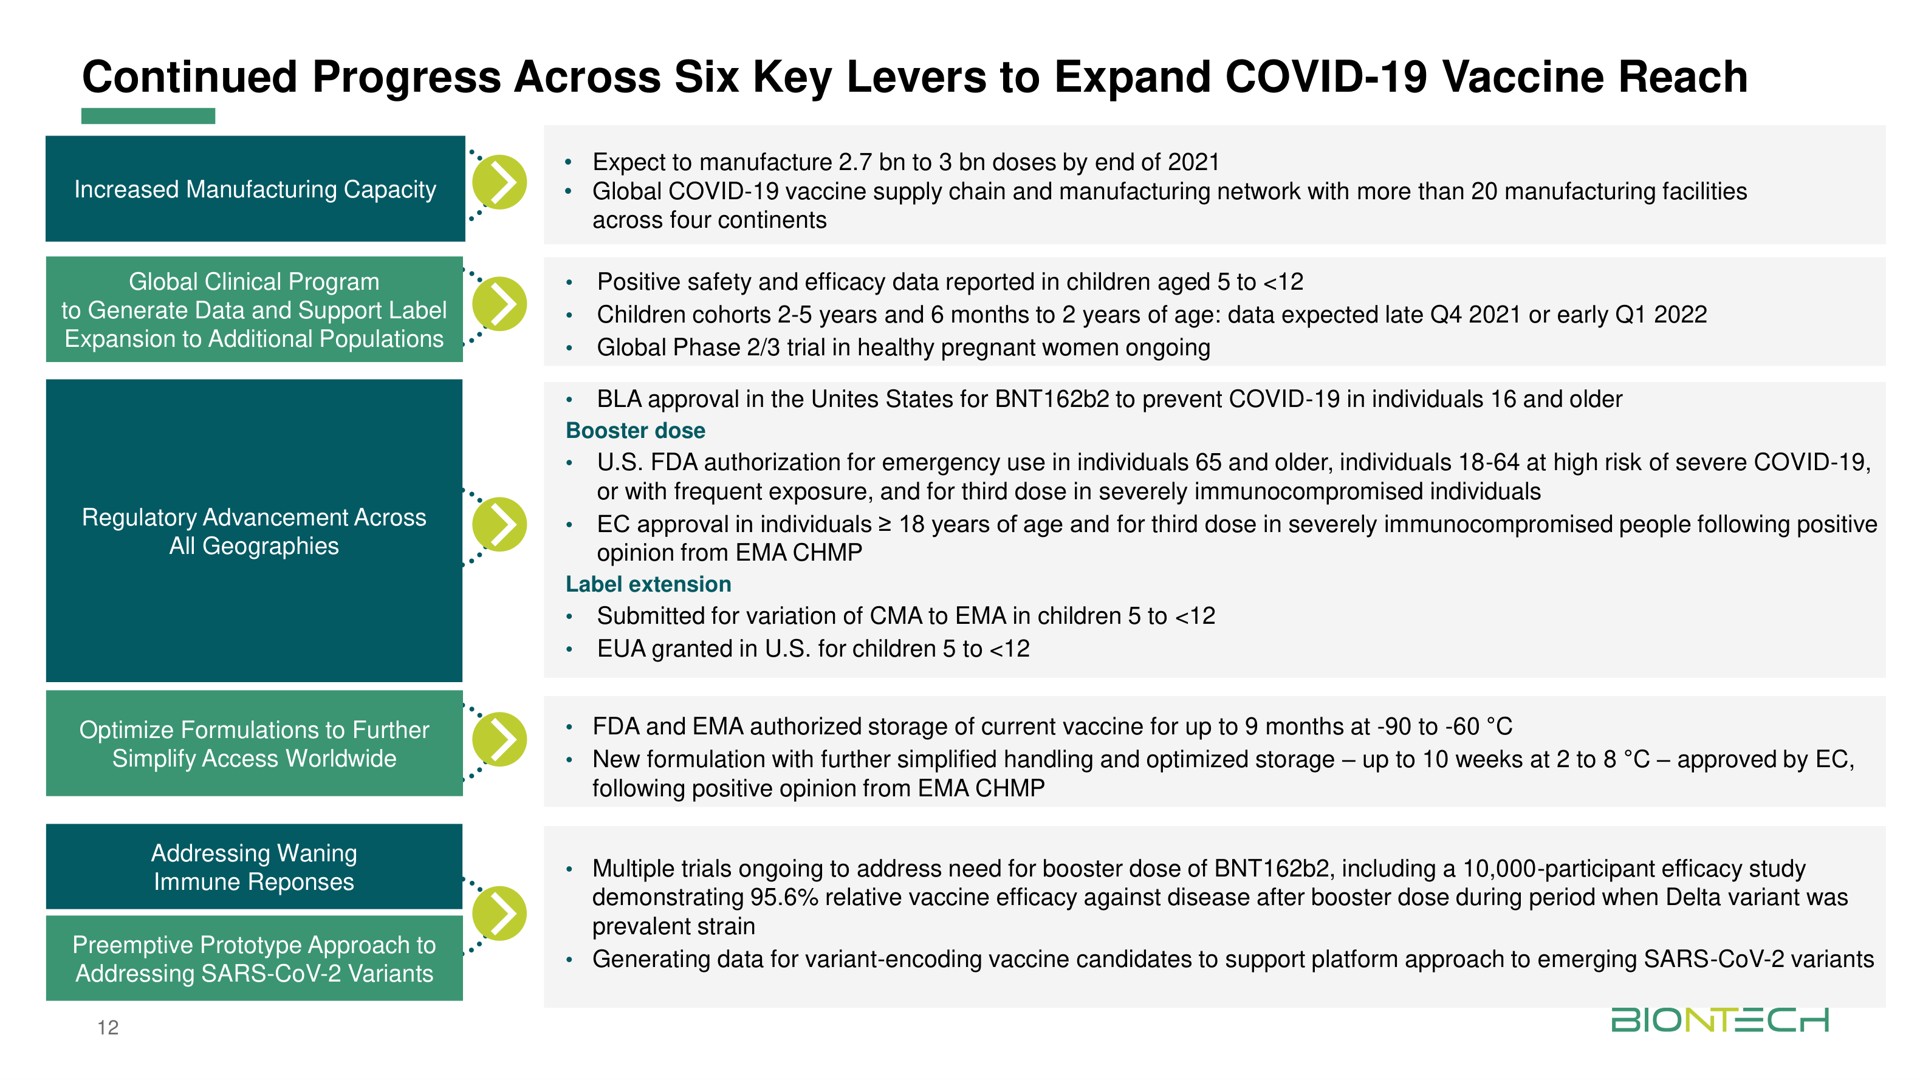 continued progress across six key levers to expand covid vaccine reach | BioNTech